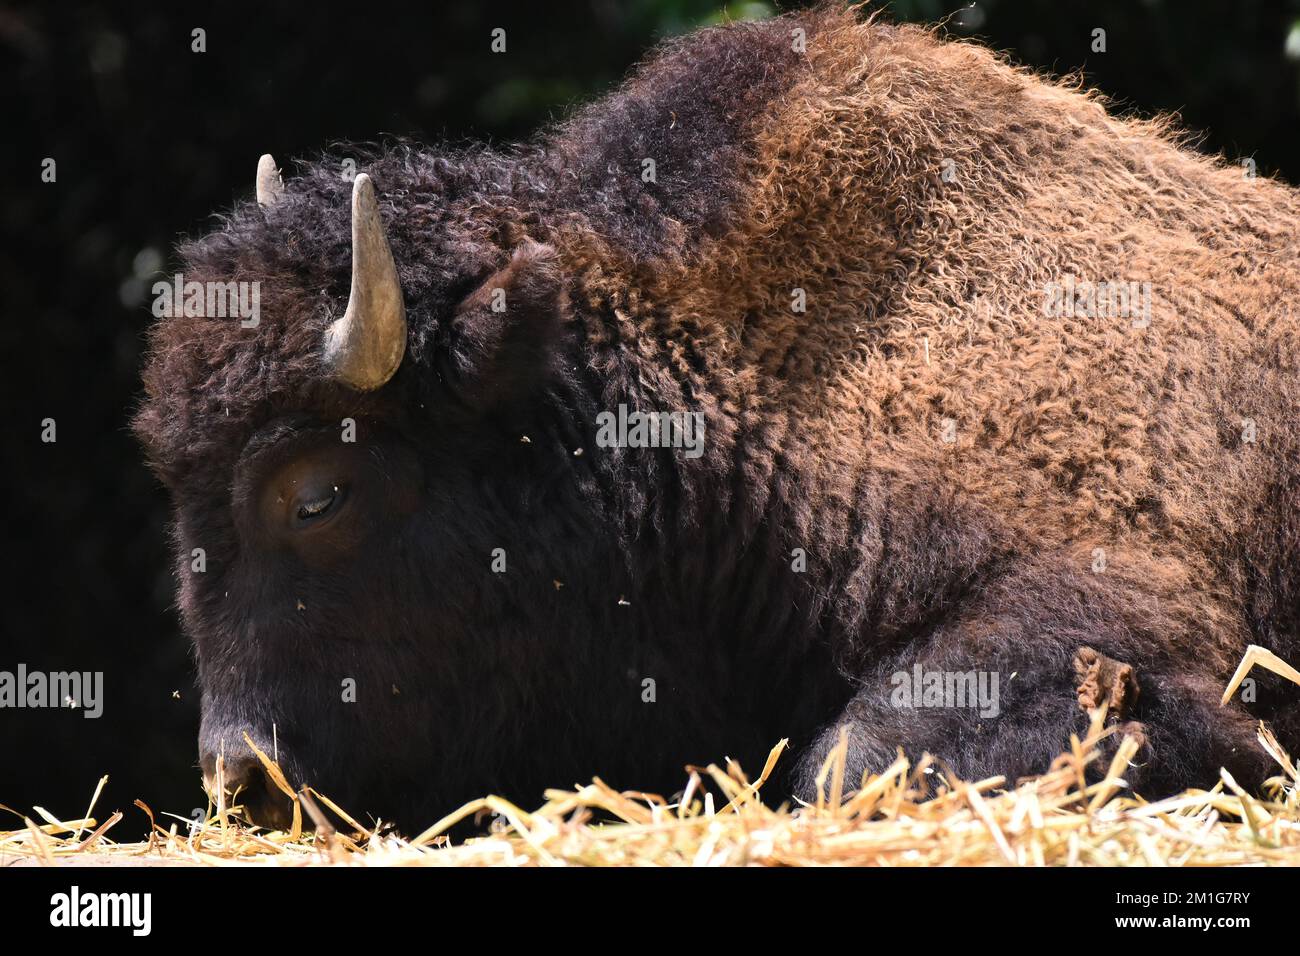 Non Exclusive: An American Bison species  seen in its habitat during a species conservation program, the zoo has 1803 animals in captivity at Chapulte Stock Photo